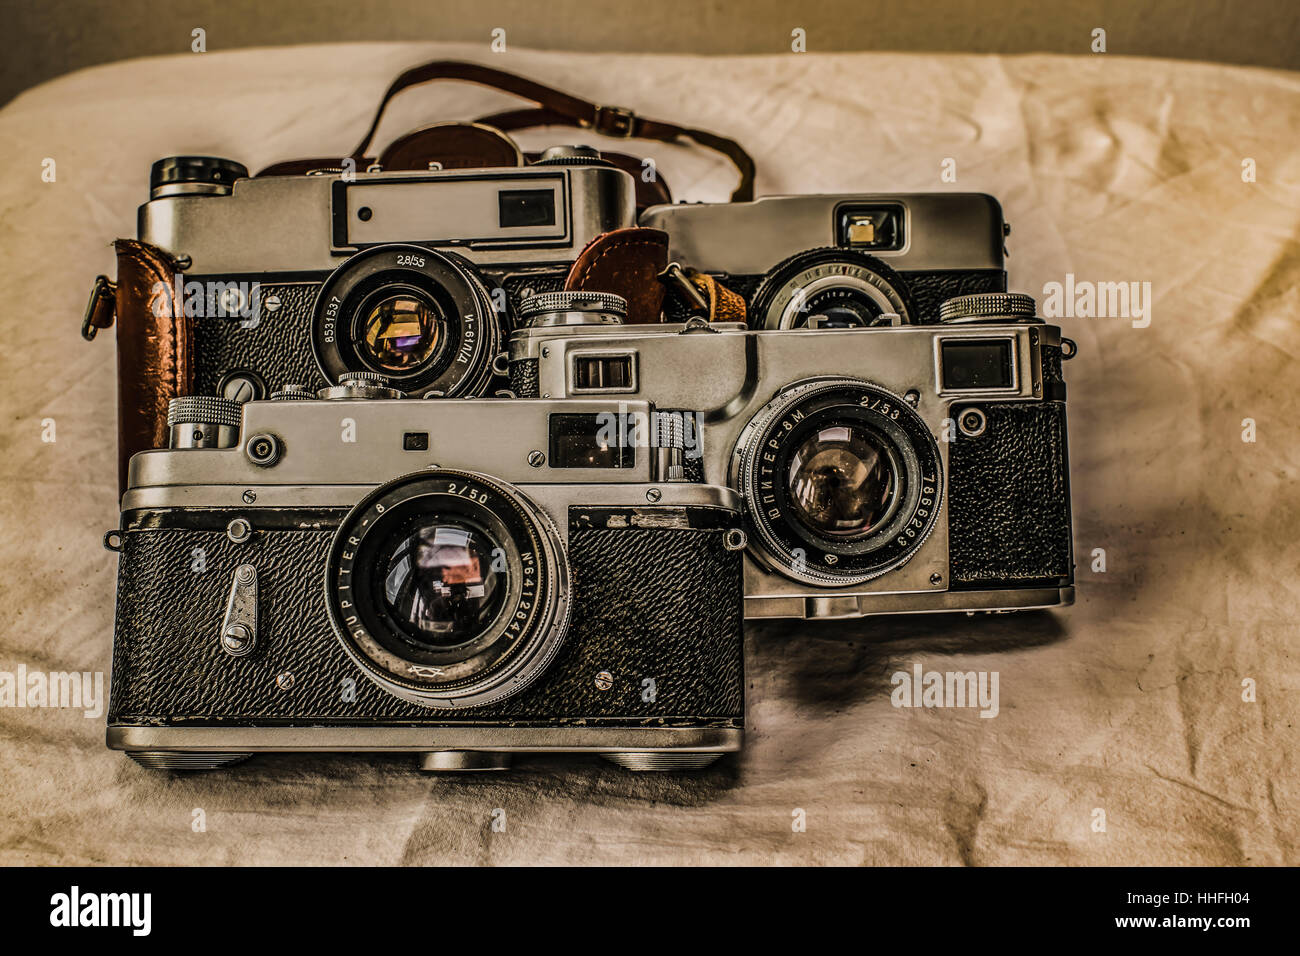 Old Russian classic analog film cameras with manual controls on dirty canvas with vintage look Stock Photo